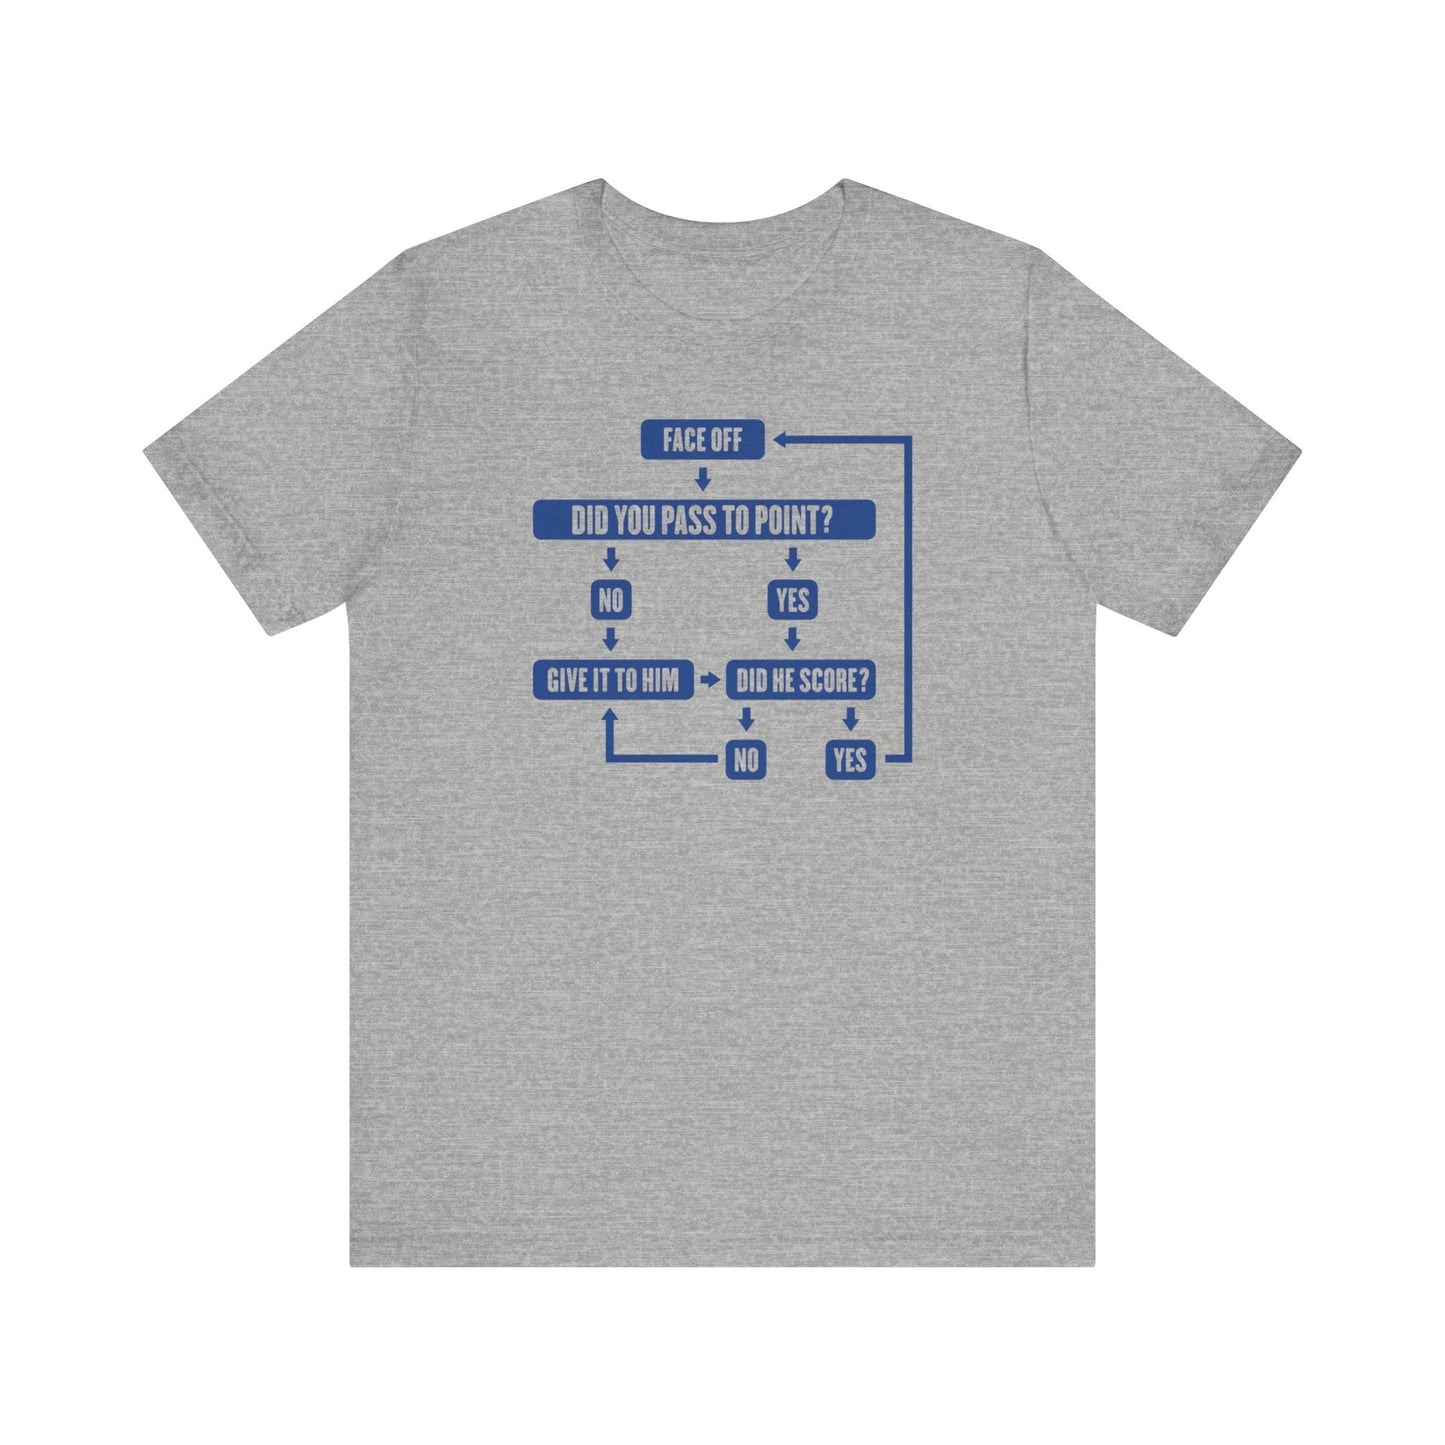 Tampa Bay - Pass To Point Shirt